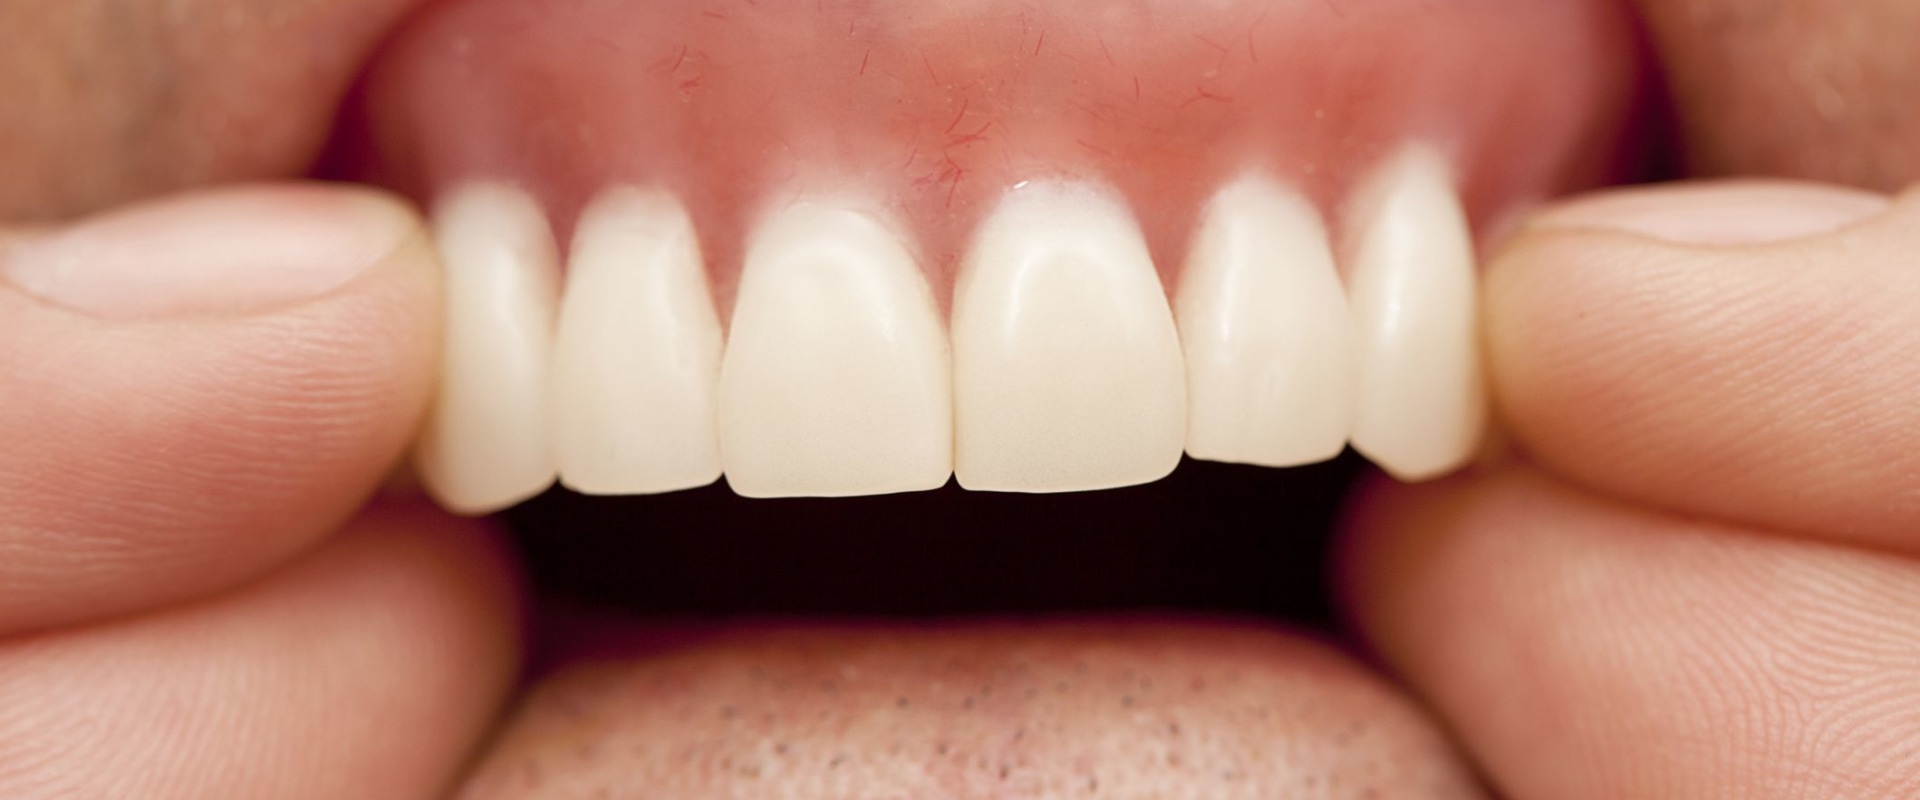 When Should You Replace Your Dentures?